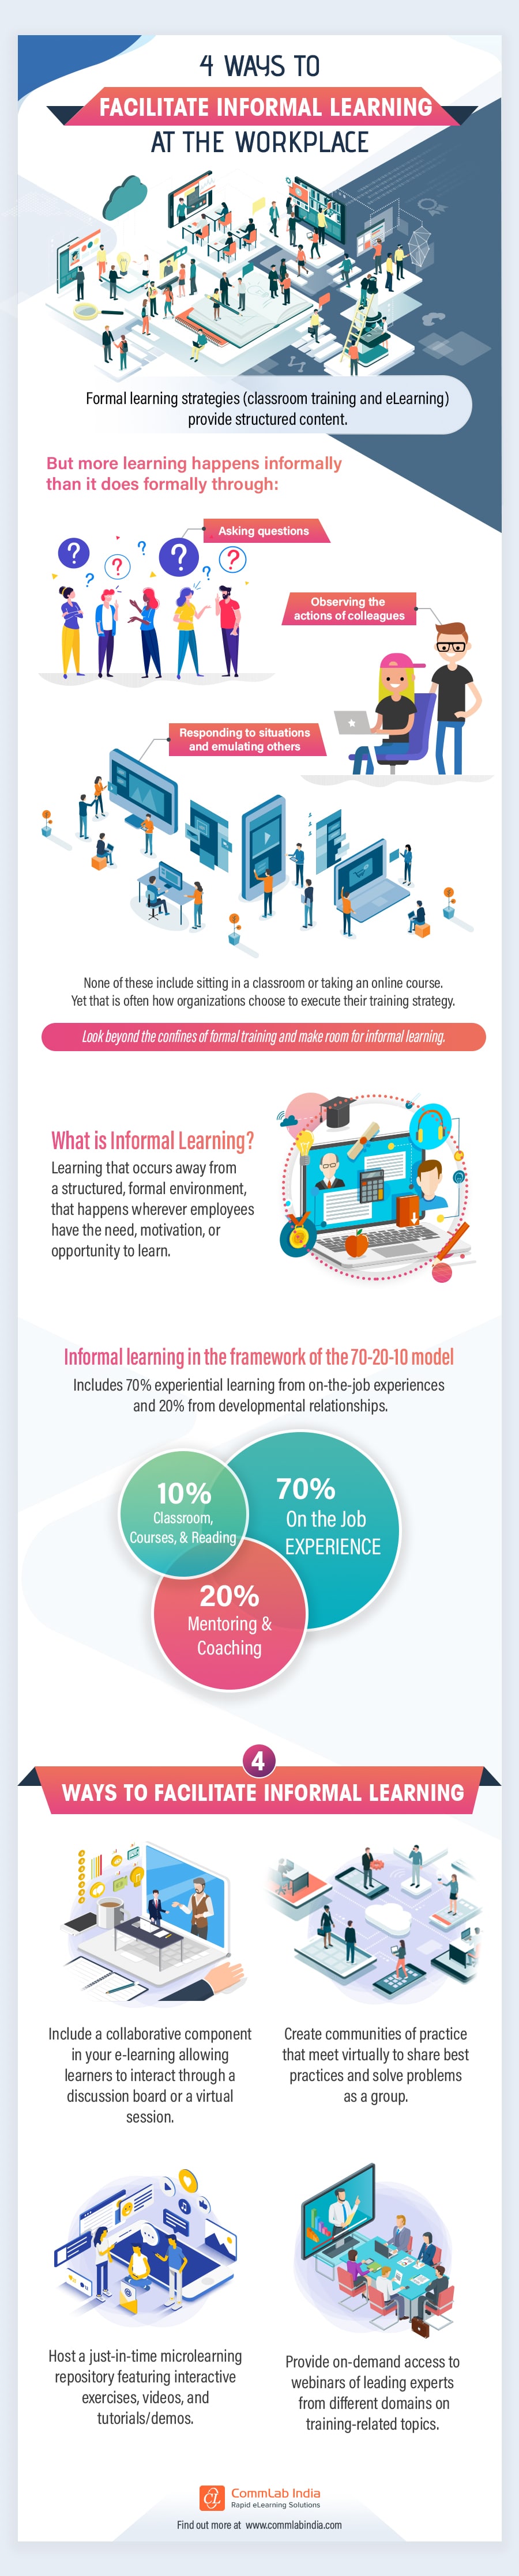 Informal Learning – Easy Tips to Move Beyond Formal Training